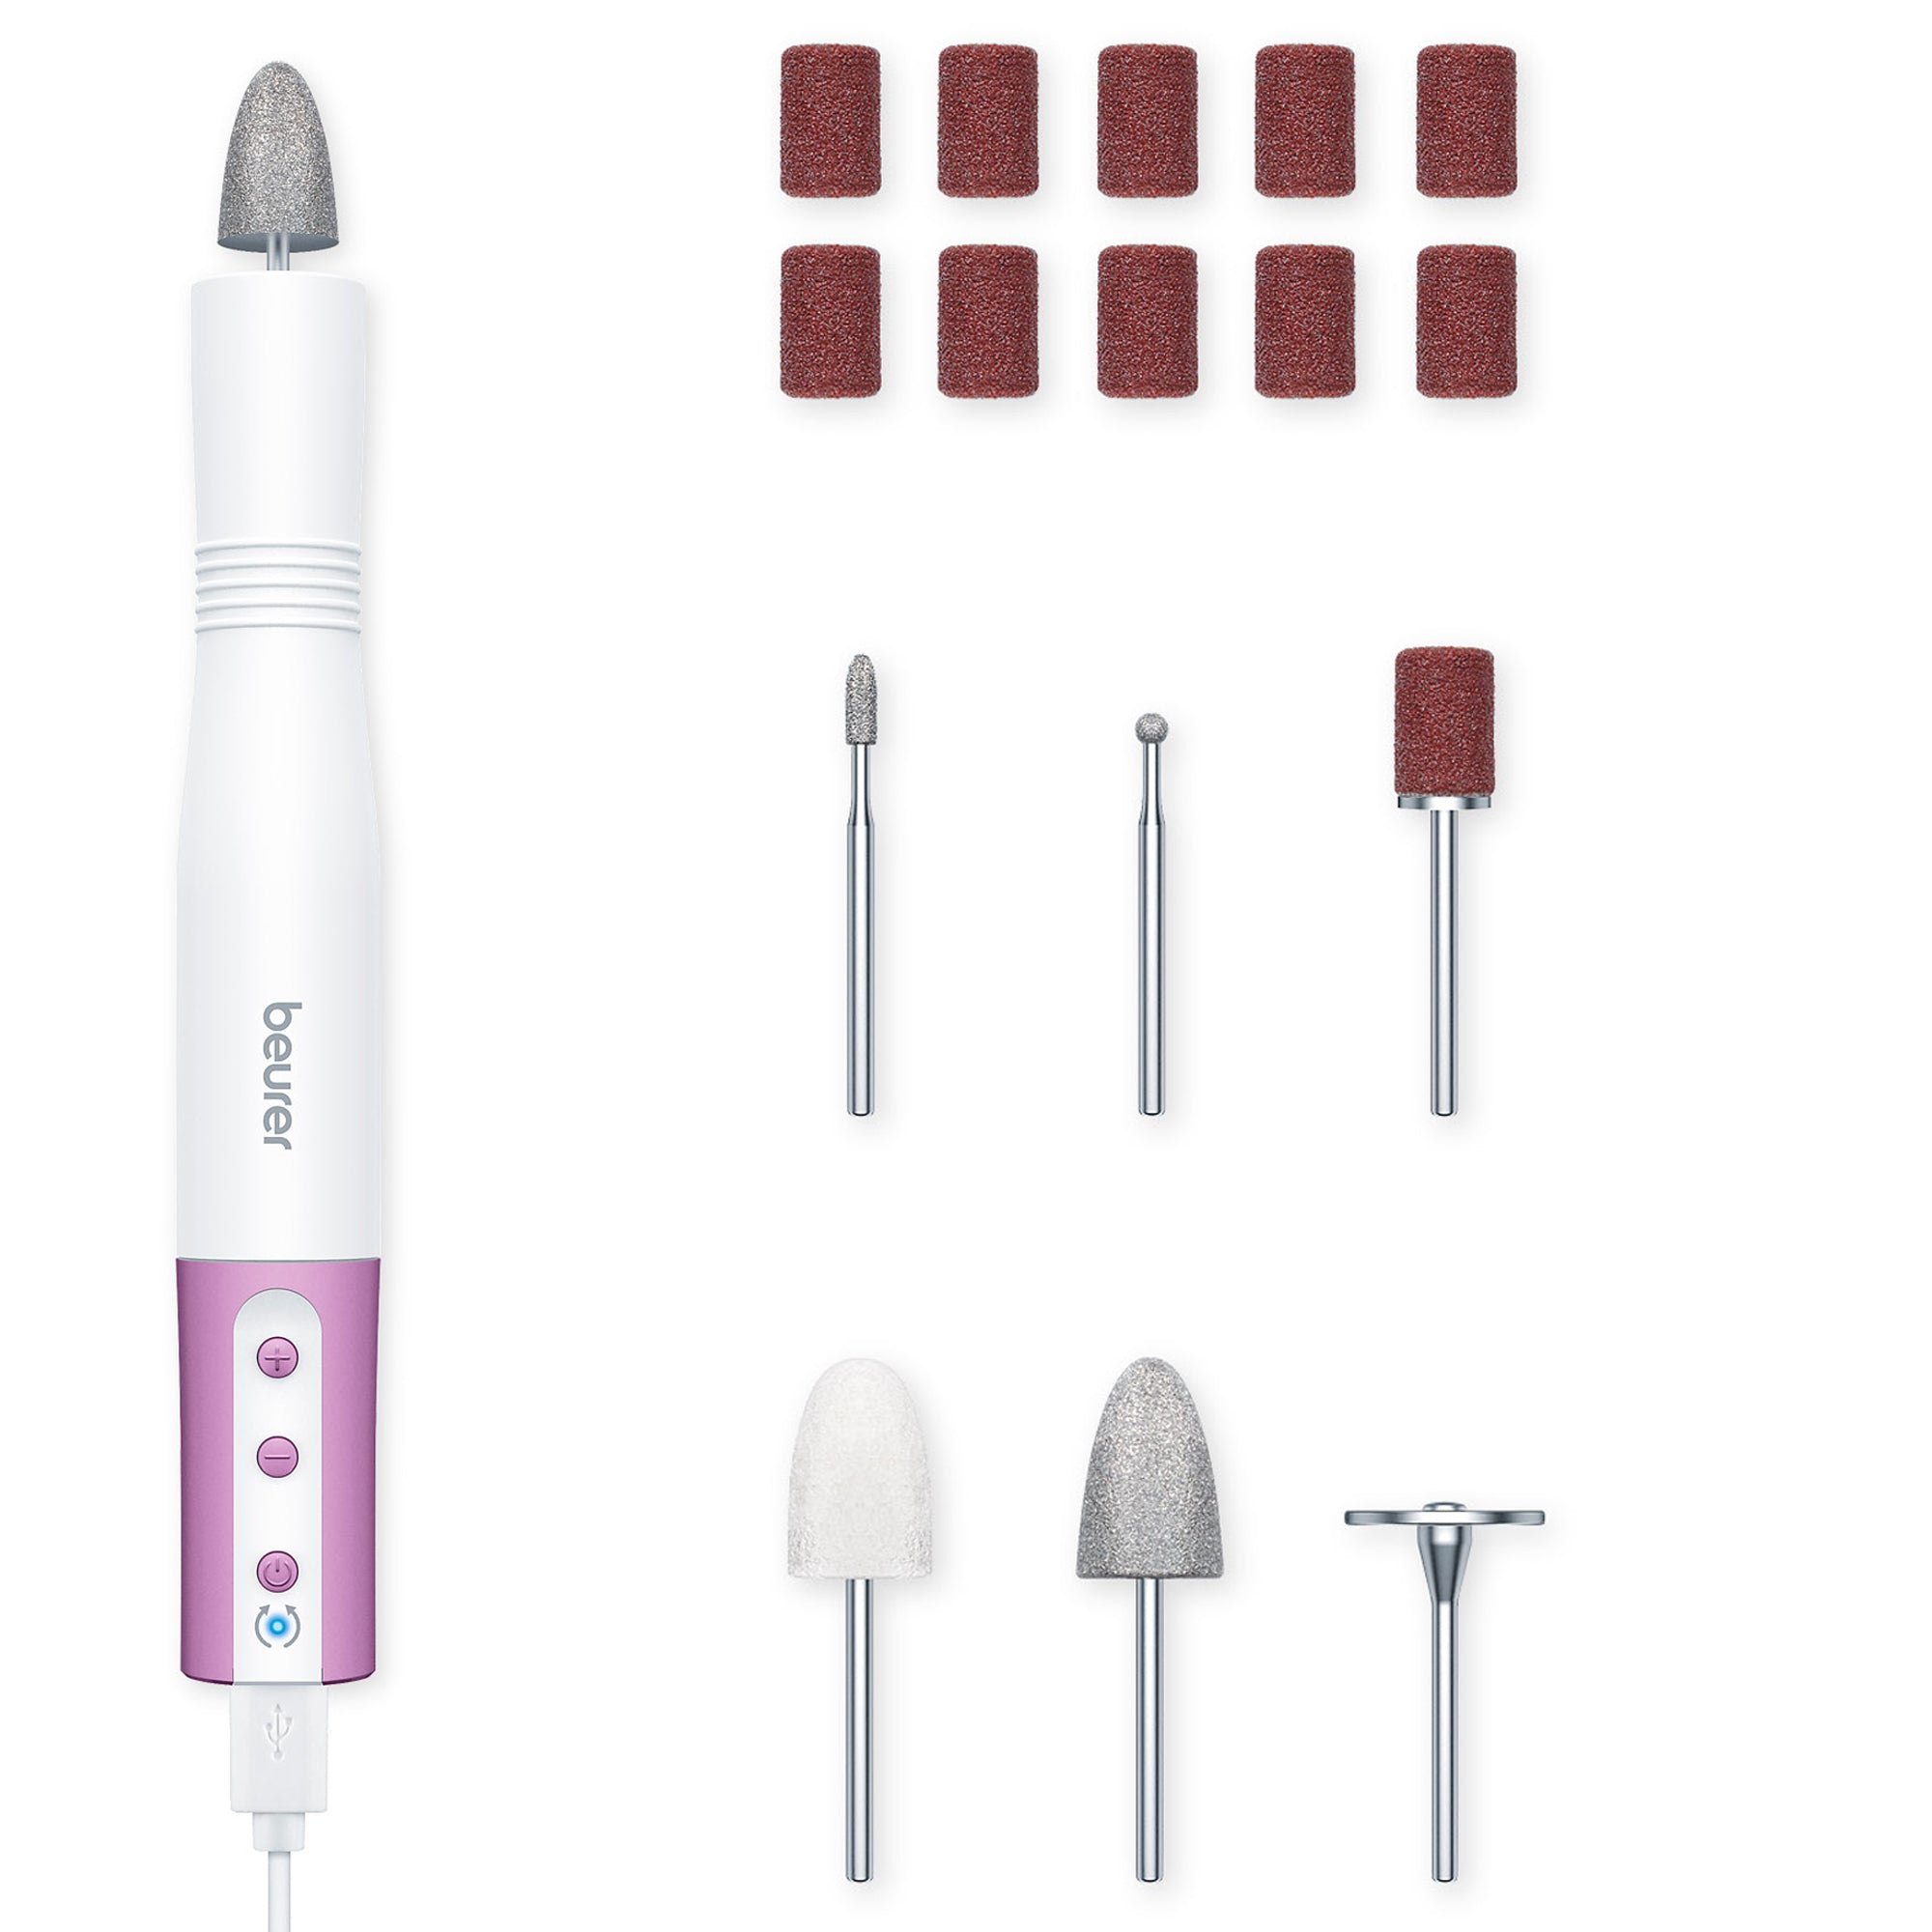 17-piece Travel Professional Manicure & Beurer North Kit, MP52 Nail Pedicure America – Drill